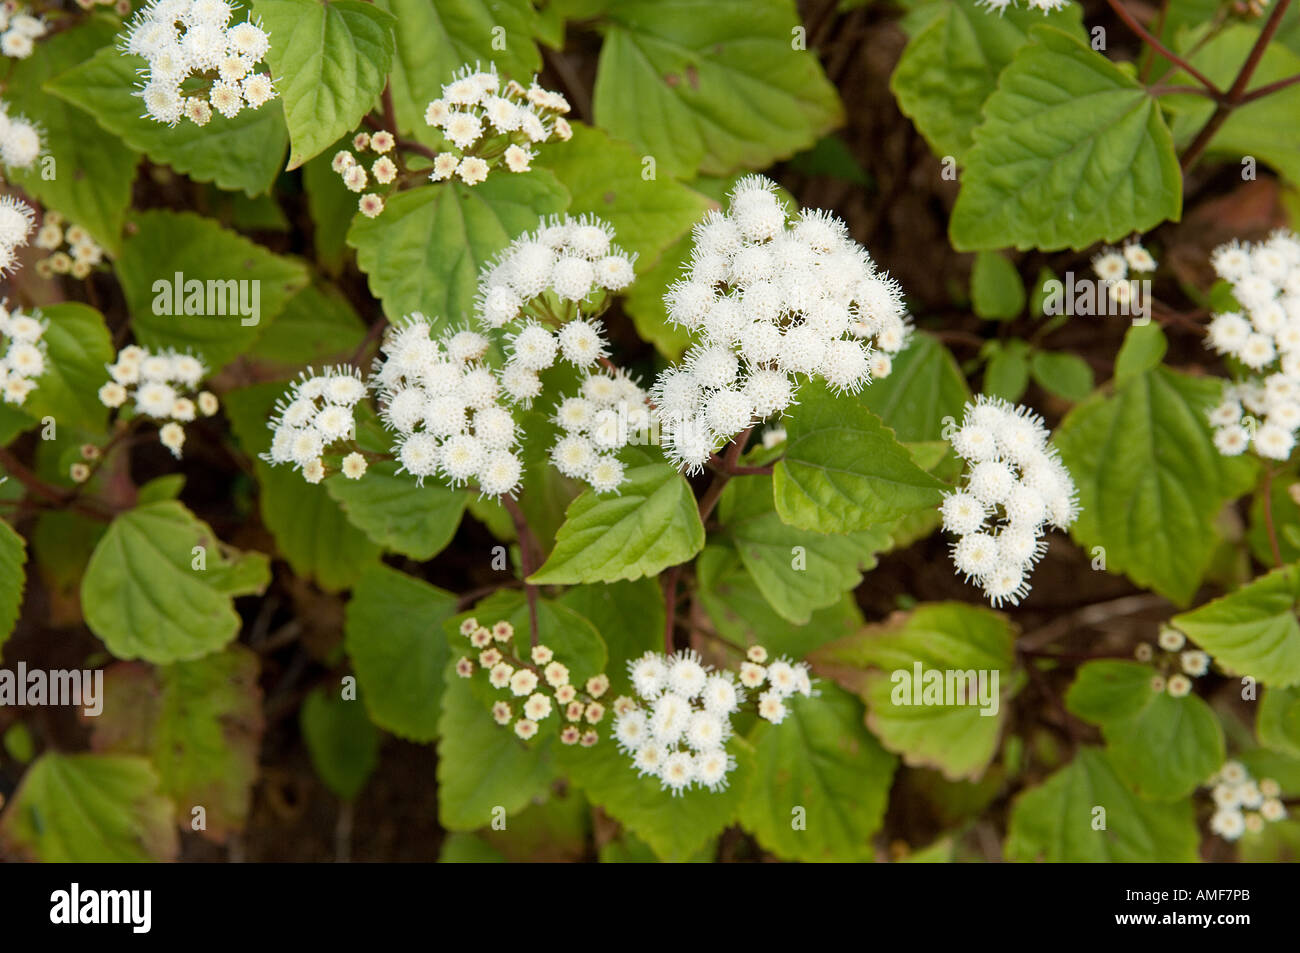 White flowers and leaves of Crofton weed, Ageratina adenophora. Island of La Gomera, Canary Islands Stock Photo